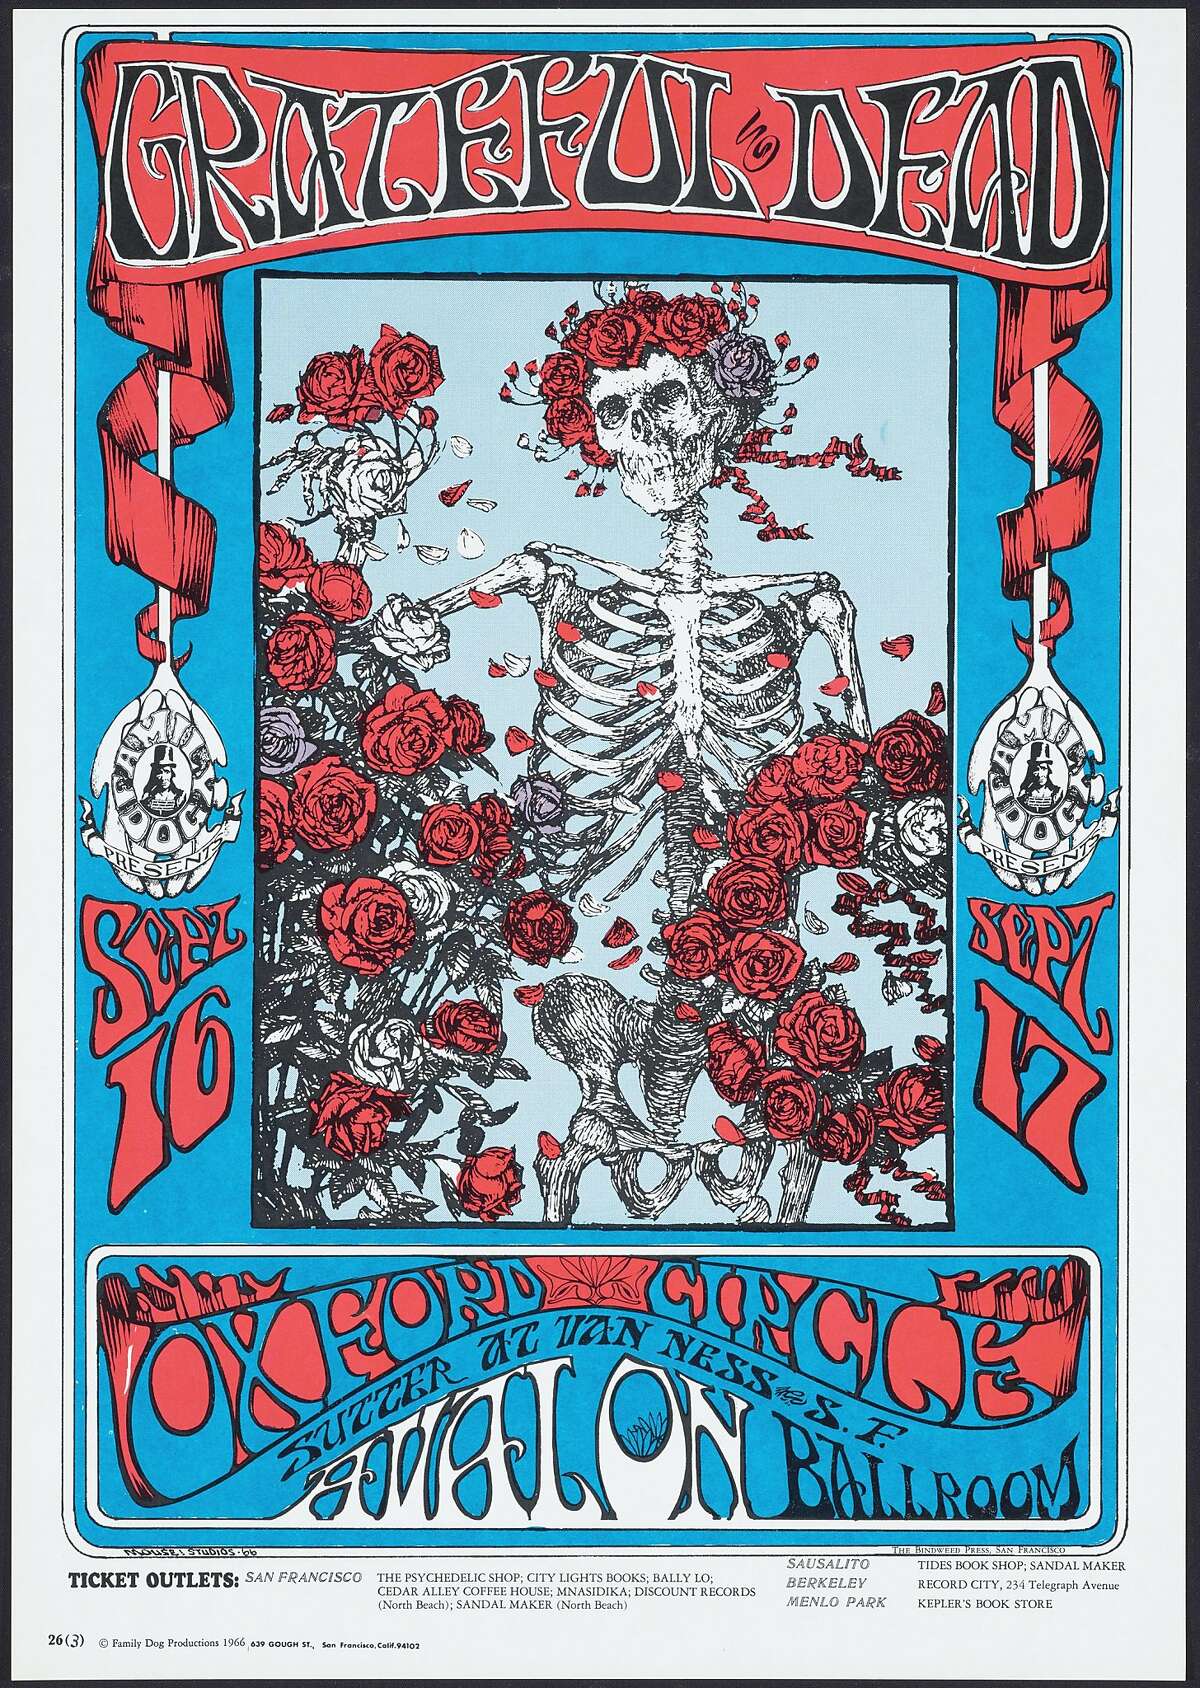 Stanley Mouse and Alton Kelley, "Skeleton and Roses," Grateful Dead, Oxford Circle, September 16 & 17, Avalon Ballroom, 1966. Color offset lithograph poster, 20 x 14 in. (50.8 x 35.5 cm). Fine Arts Museums of San Francisco, Museum purchase, Achenbach Foundation for Graphic Arts Endowment Fund, 1974.13.100. Artwork by Stanley Mouse and Alton Kelley. � 1966, 1984, 1994 Rhino Entertainment Company. Used with permission. All rights reserved. www.familydog.com On view at de Young Museum, "Summer of Love: Art, Fashion, and Rock & Roll," April 8 � August 20, 2017 Image Courtesy of the Fine Arts Museums of San Francisco